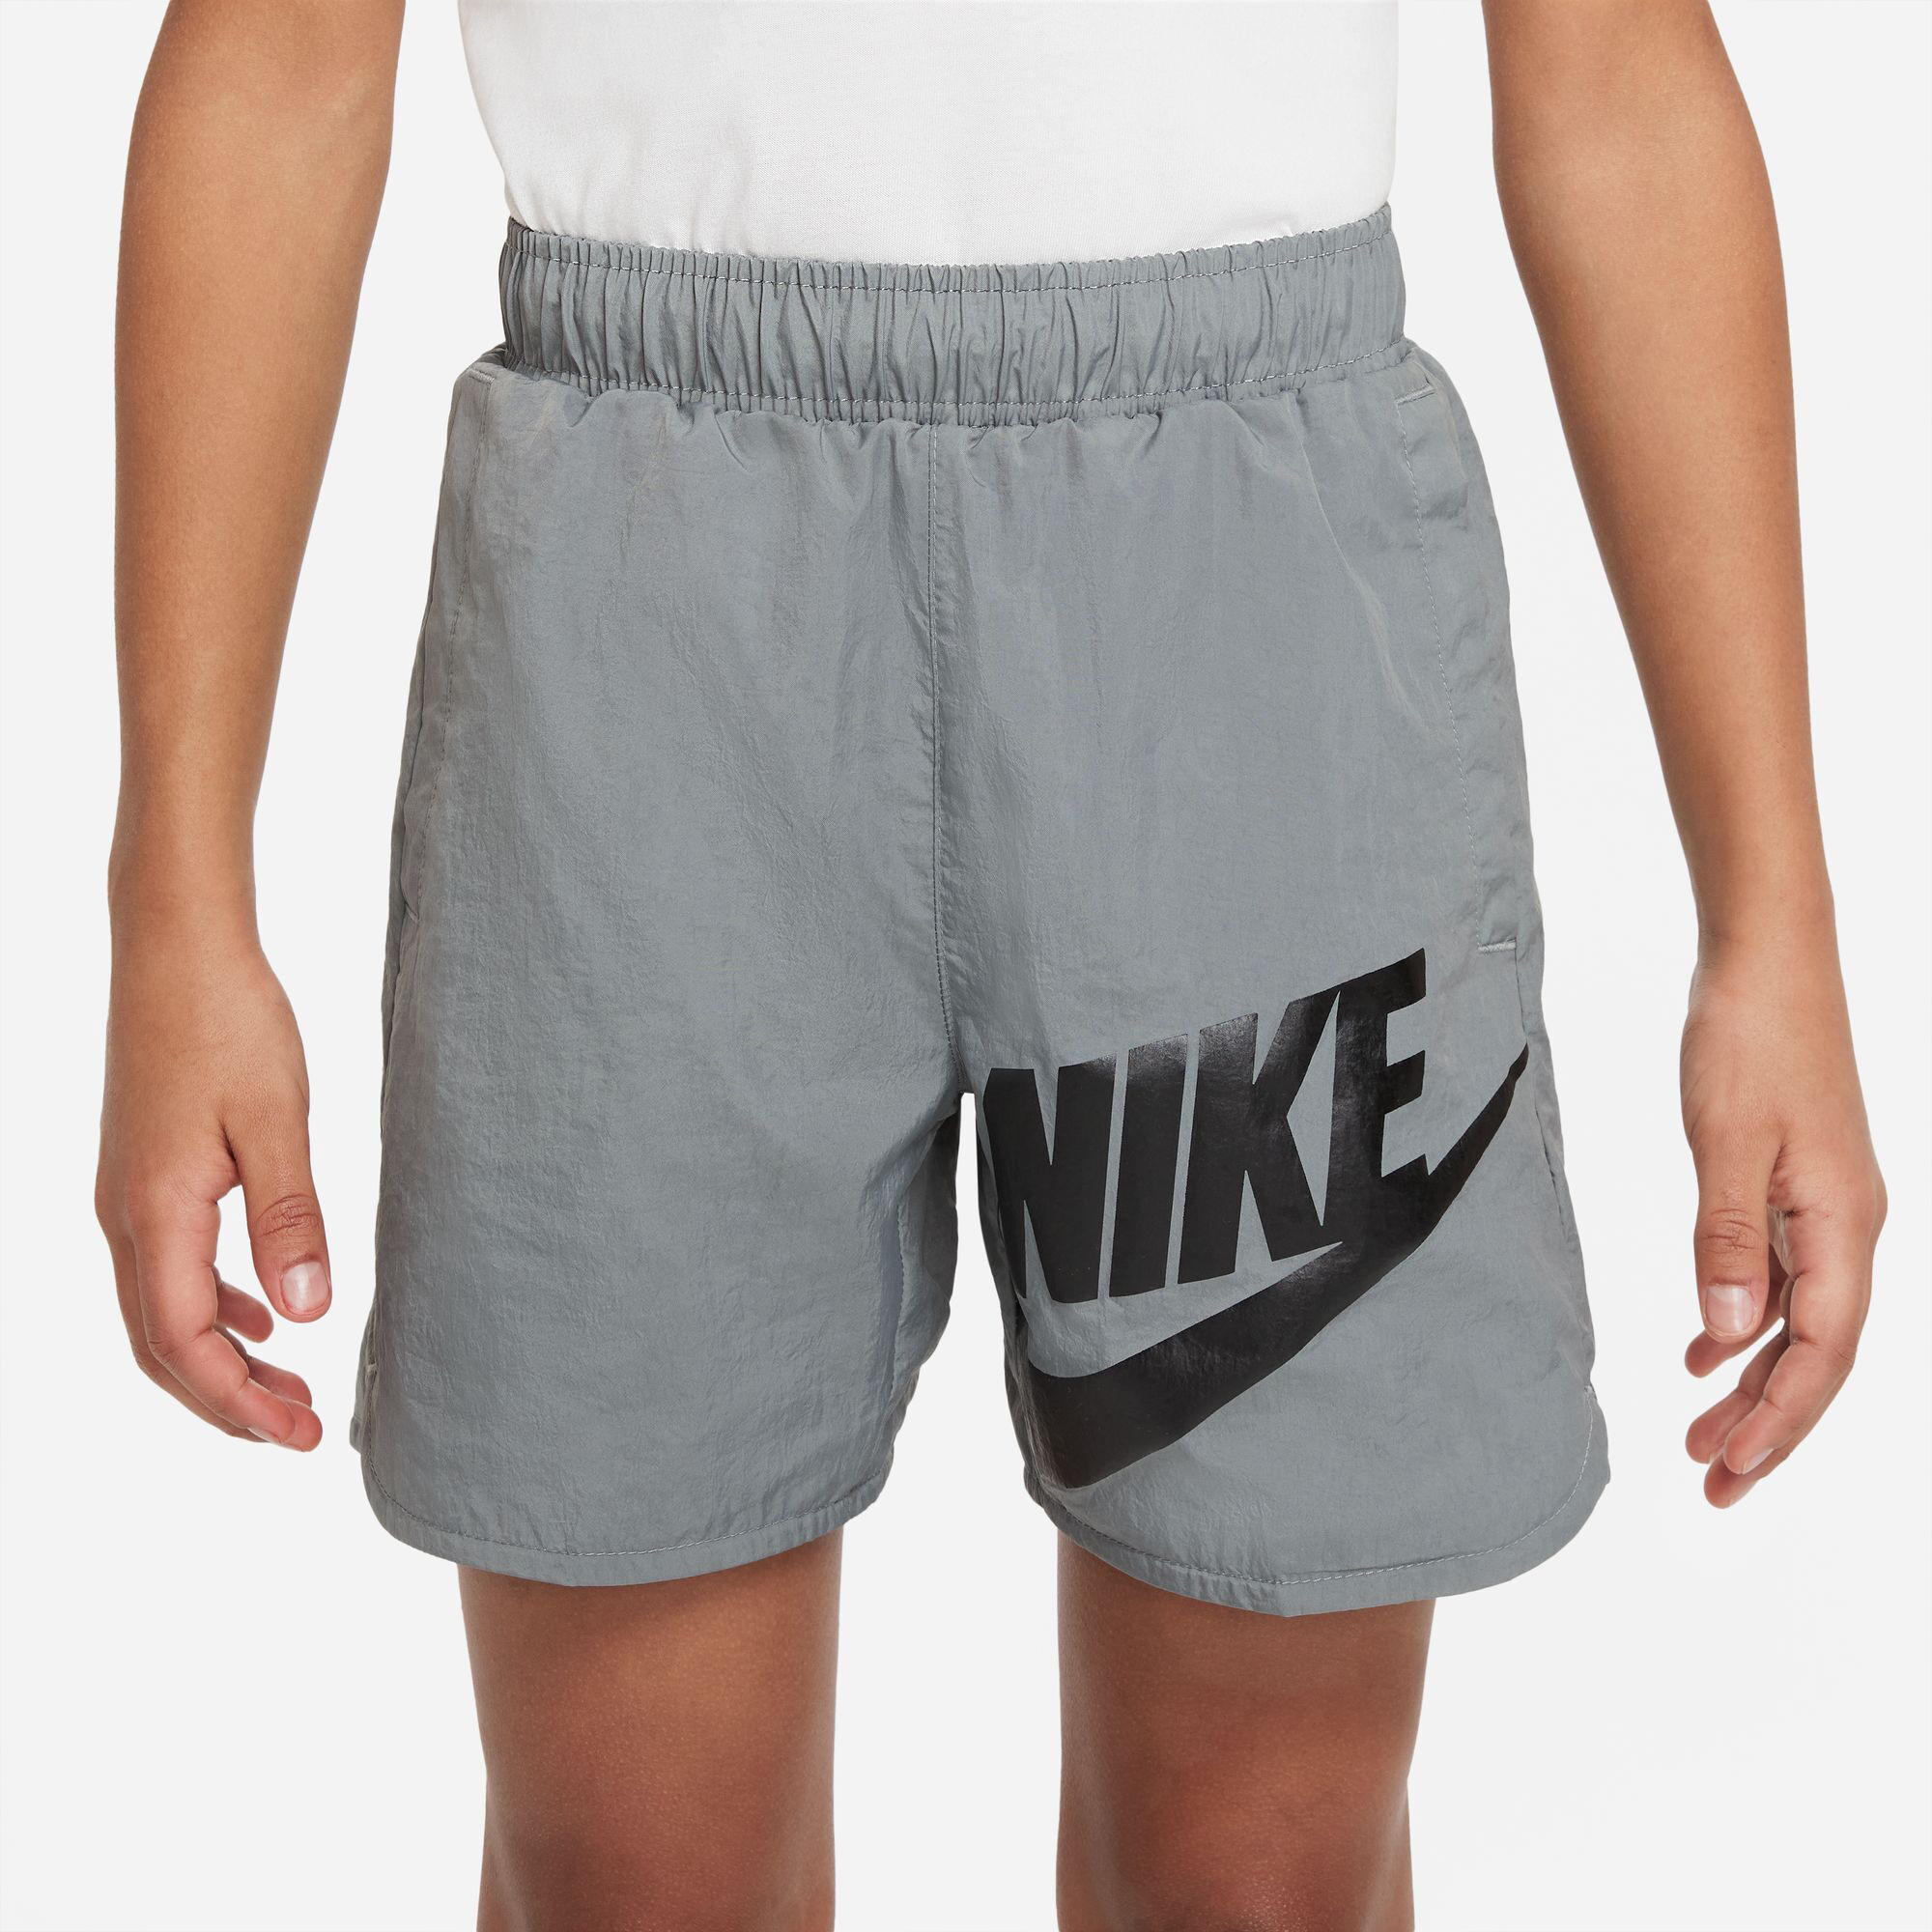 Nike Woven HBR Shorts Chicos - Gris, Negro compra online | Tennis-Point